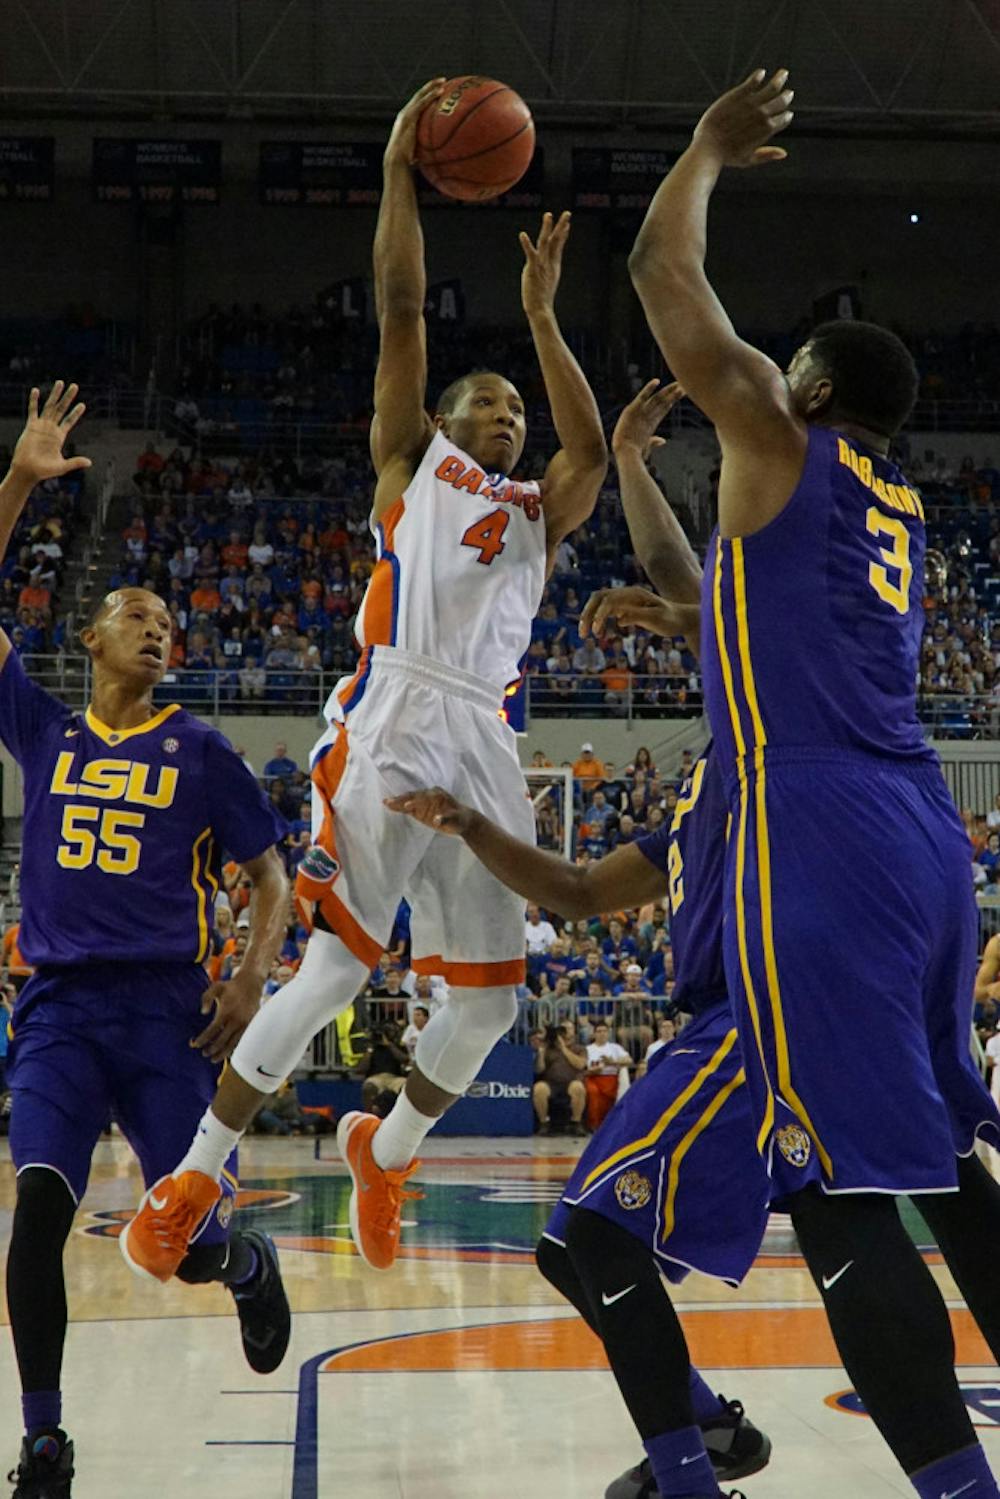 <p>UF guard KeVaughn Allen attempts to shoot over LSU’s Elbert Robinson III during Florida’s 68-62 win over LSU on Jan. 9, 2016, in the O’Connell Center.</p>